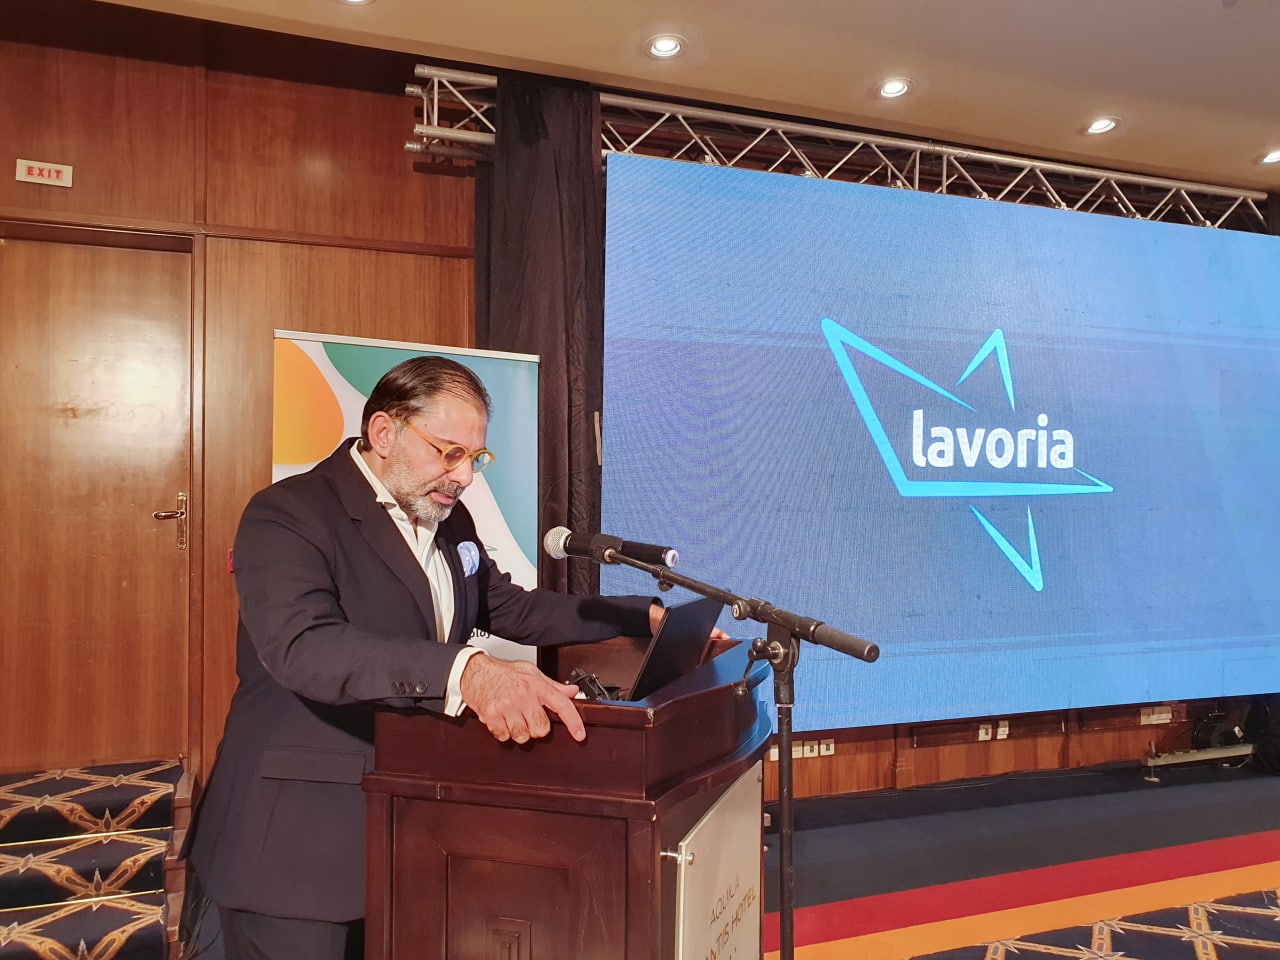 LAVORIA launched in Greece